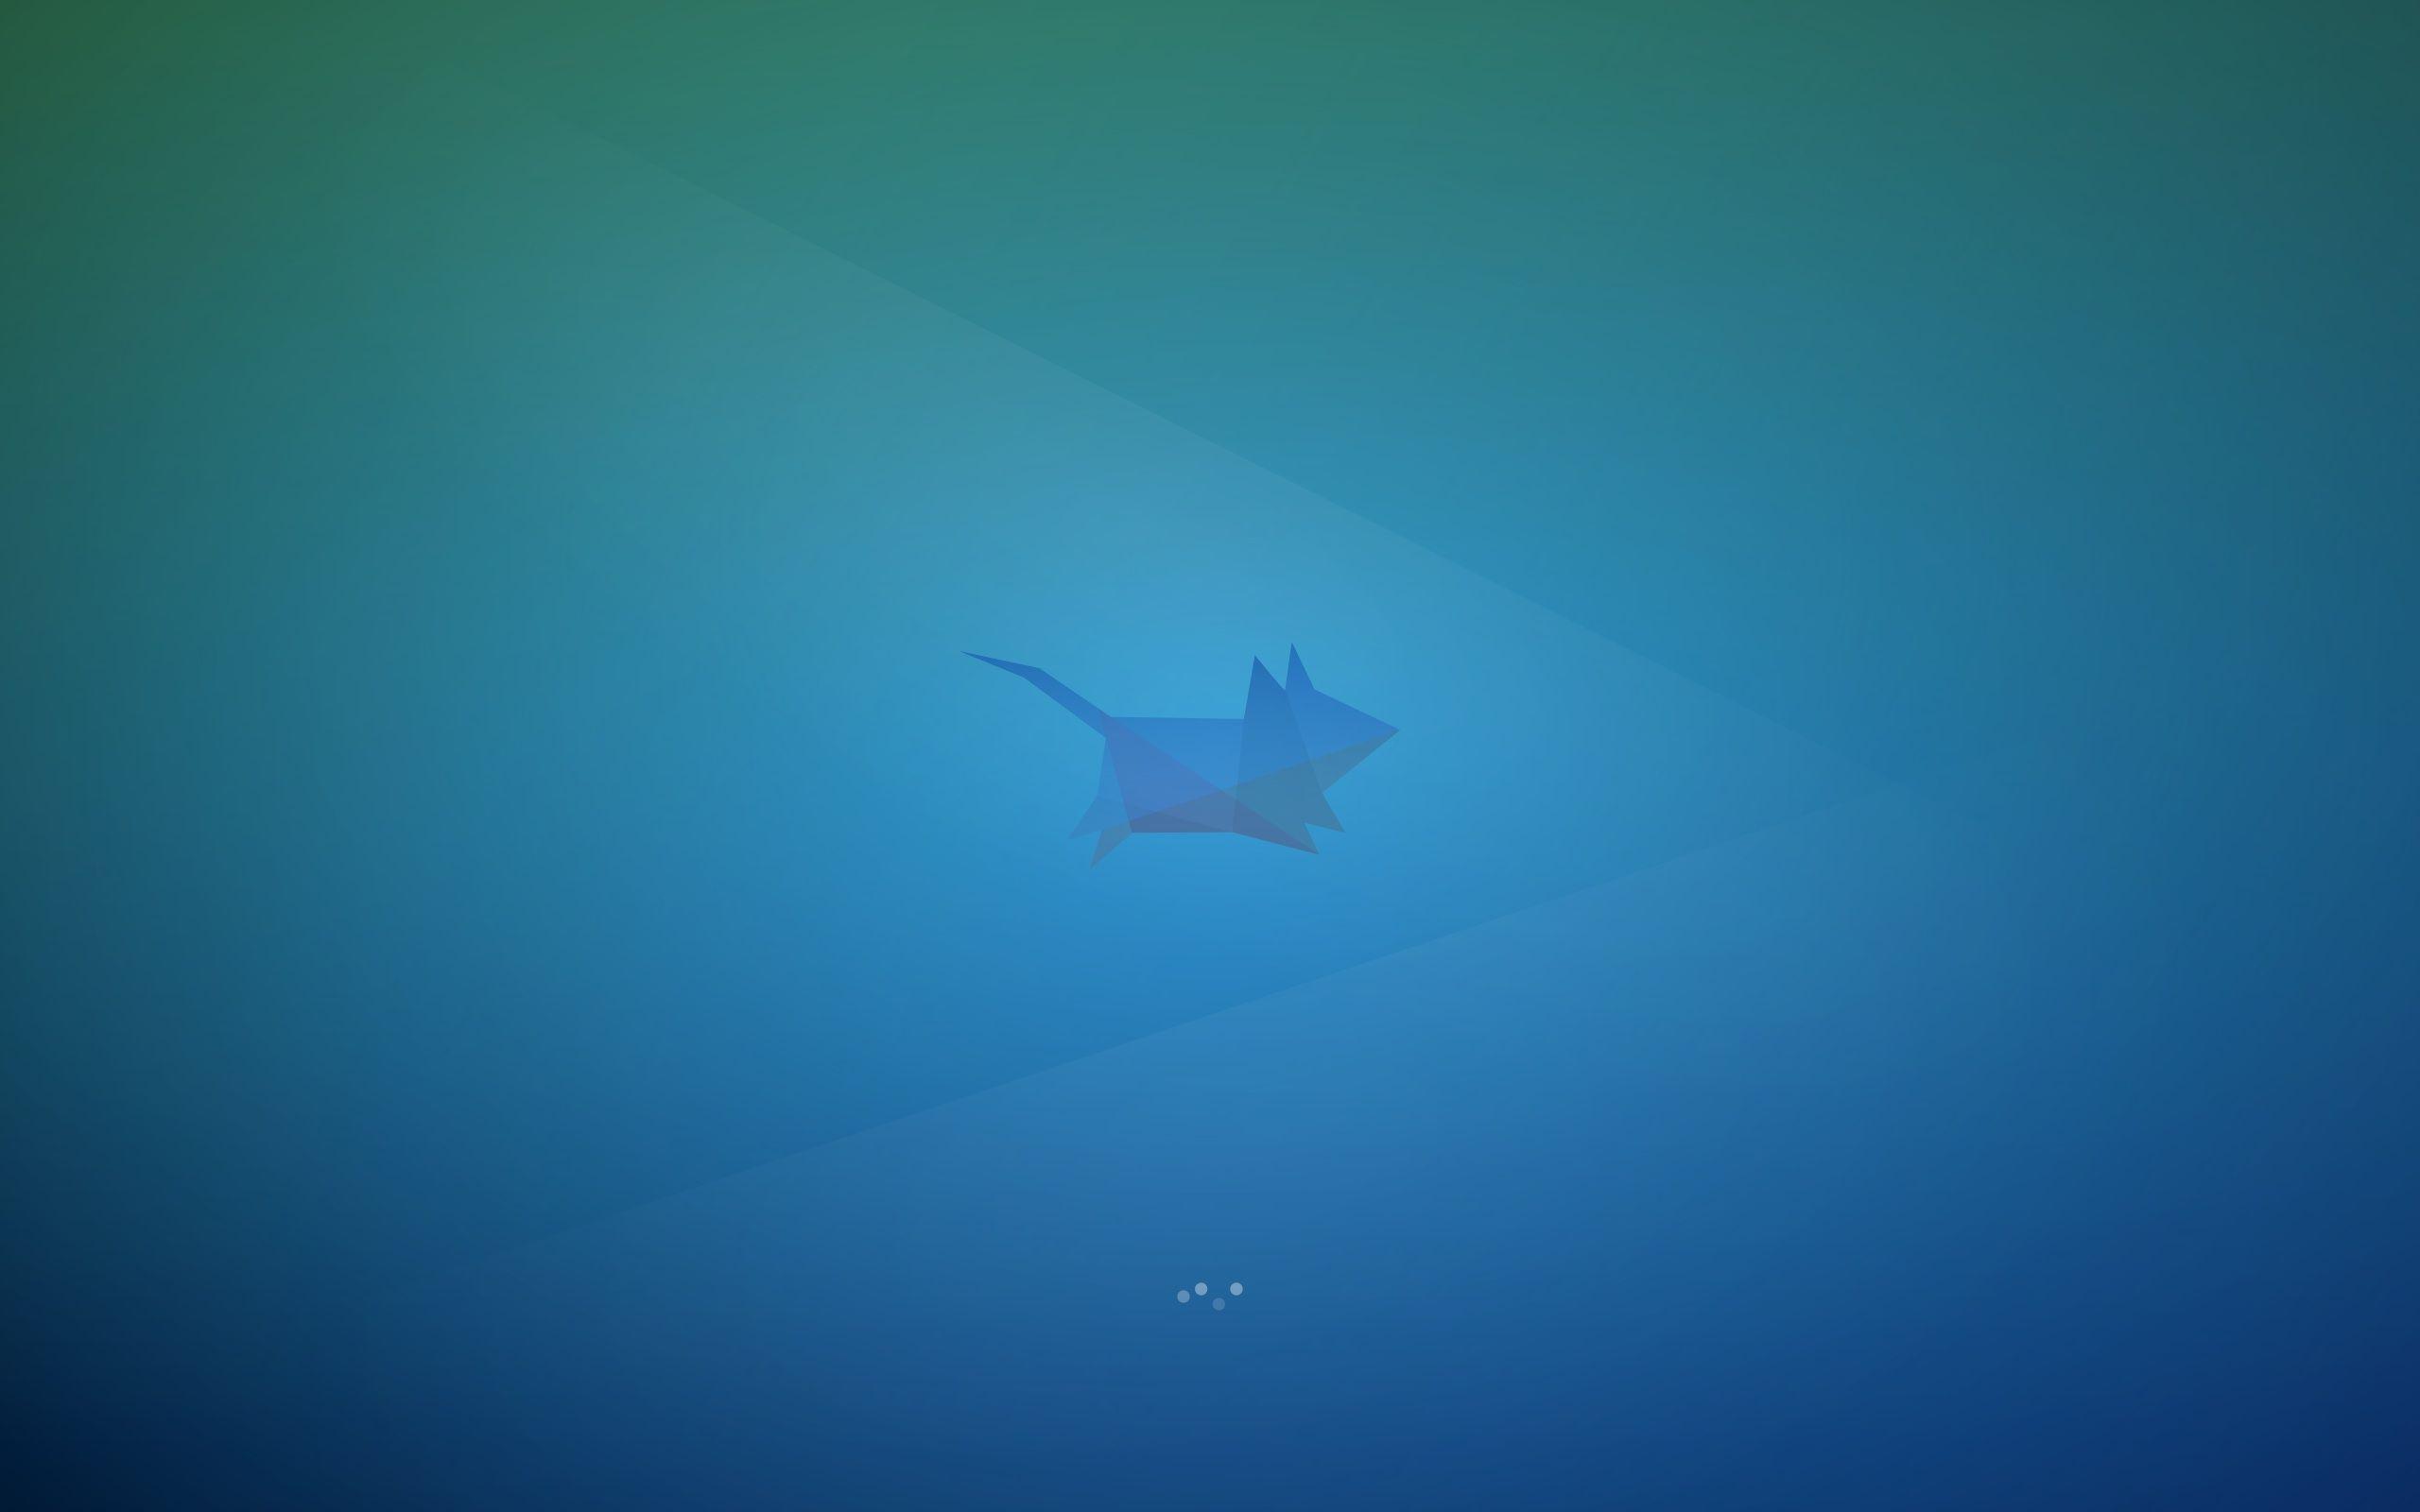 Xfce Wallpapers